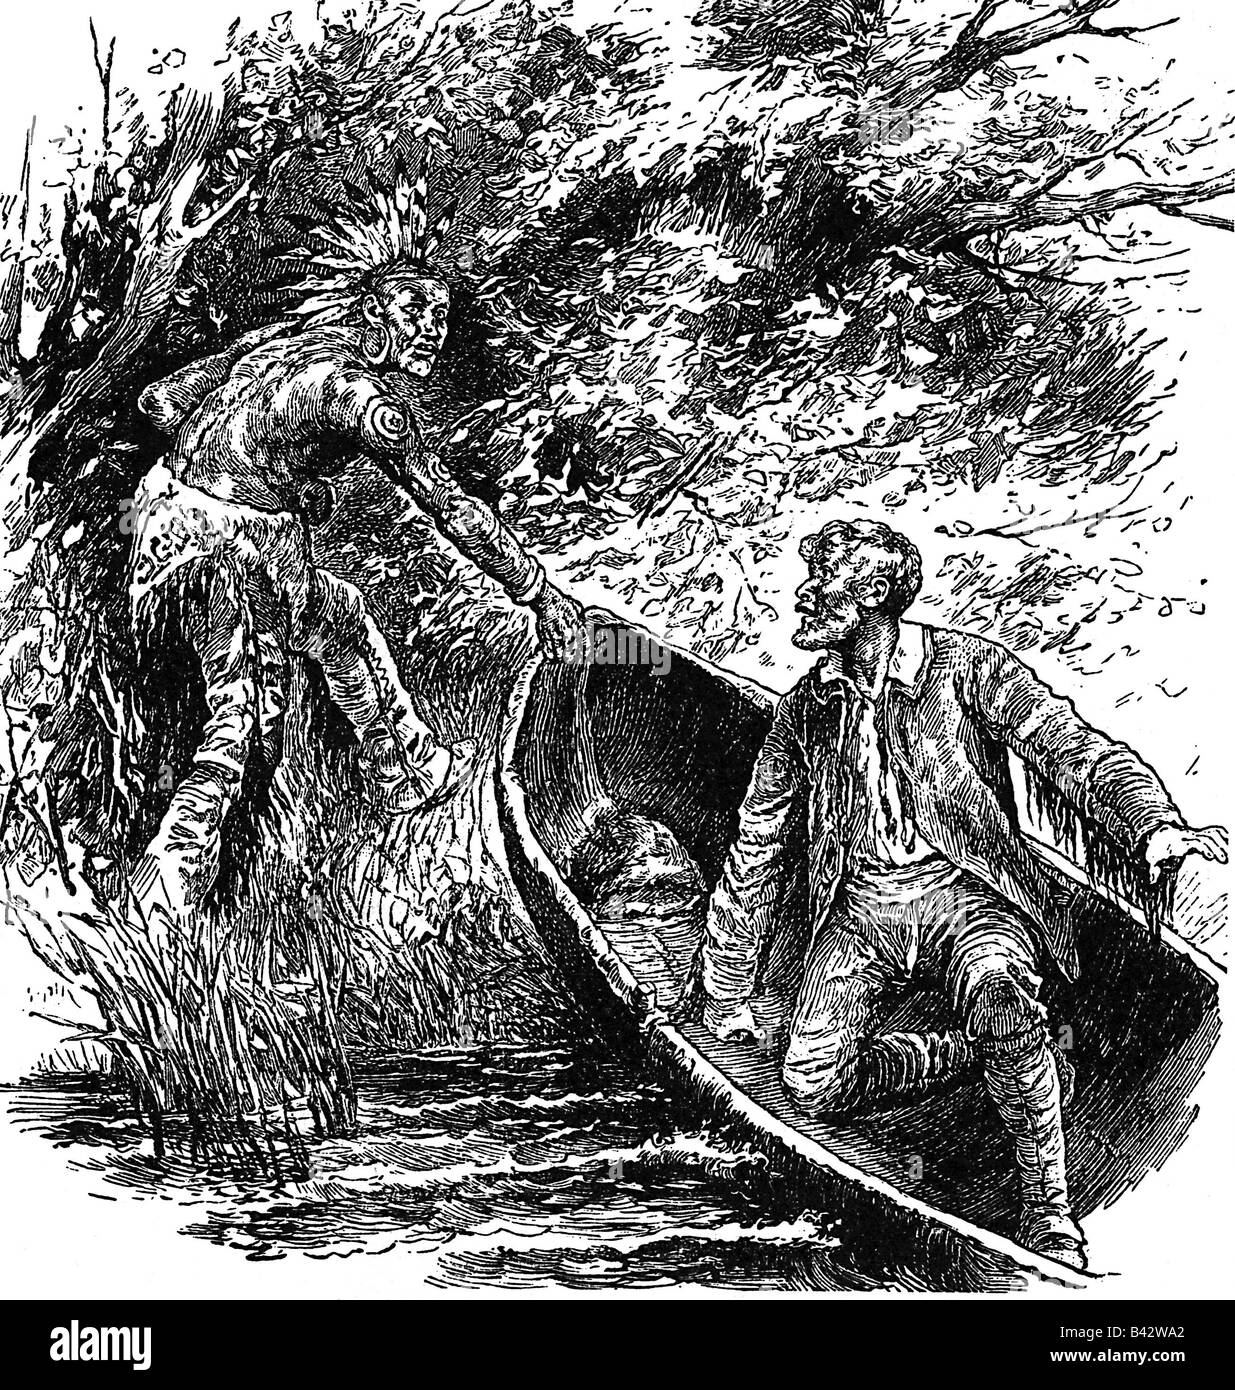 Cooper, James Fenimore, 15.9.1789 - 14.9.1851, American author / writer, works, novel 'The Dearslayer', 1841, illustration, scene, 'Dearslayers capture', wood engraving, 19th century, , Stock Photo